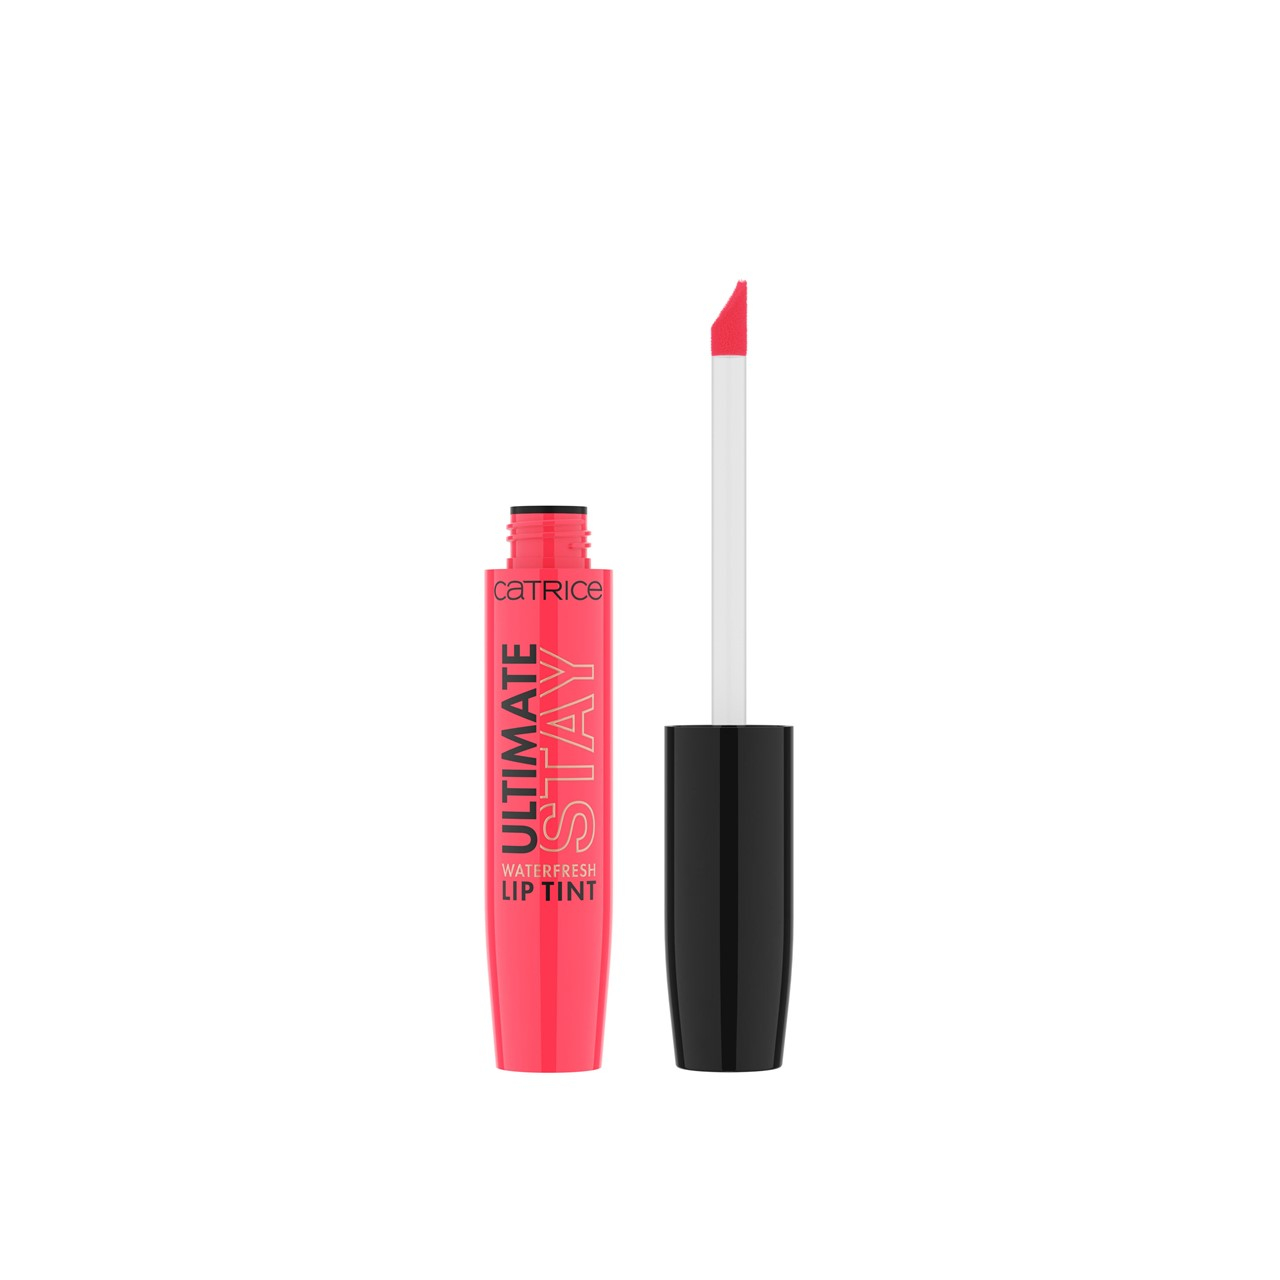 Catrice Ultimate Stay Waterfresh Lip Tint 030 Never Let You Down 5.5g (0.19oz)